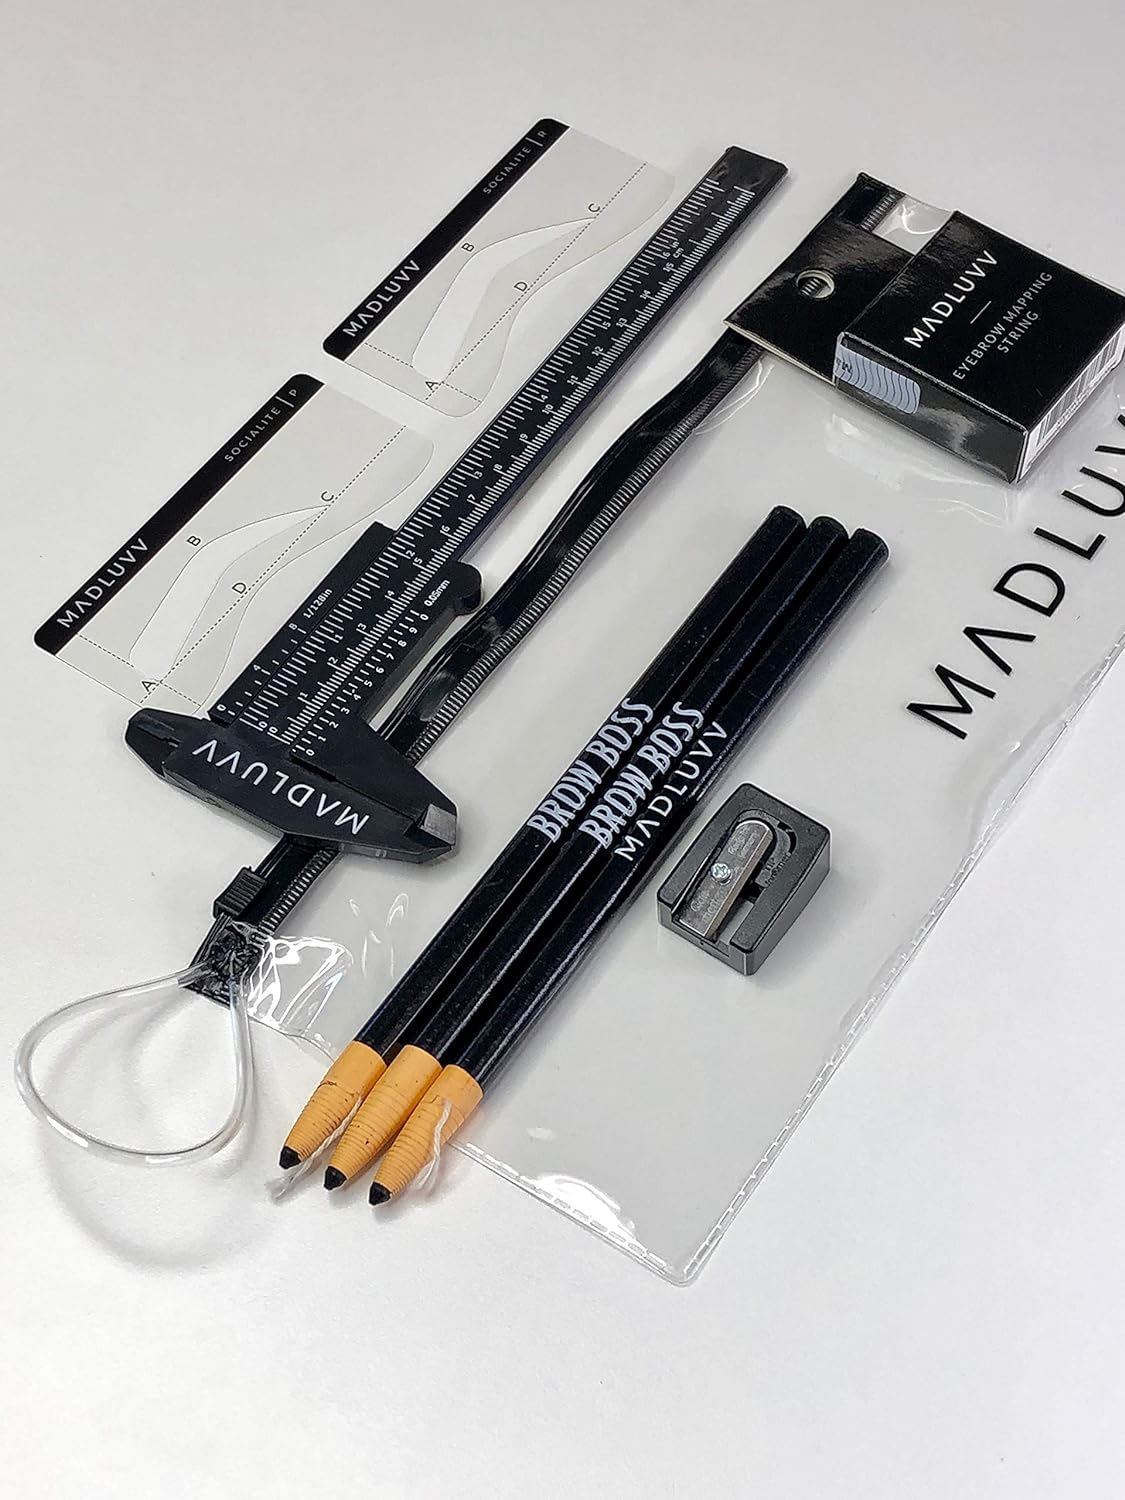 Best Brow Mapping Kit- Create the Perfect Brow